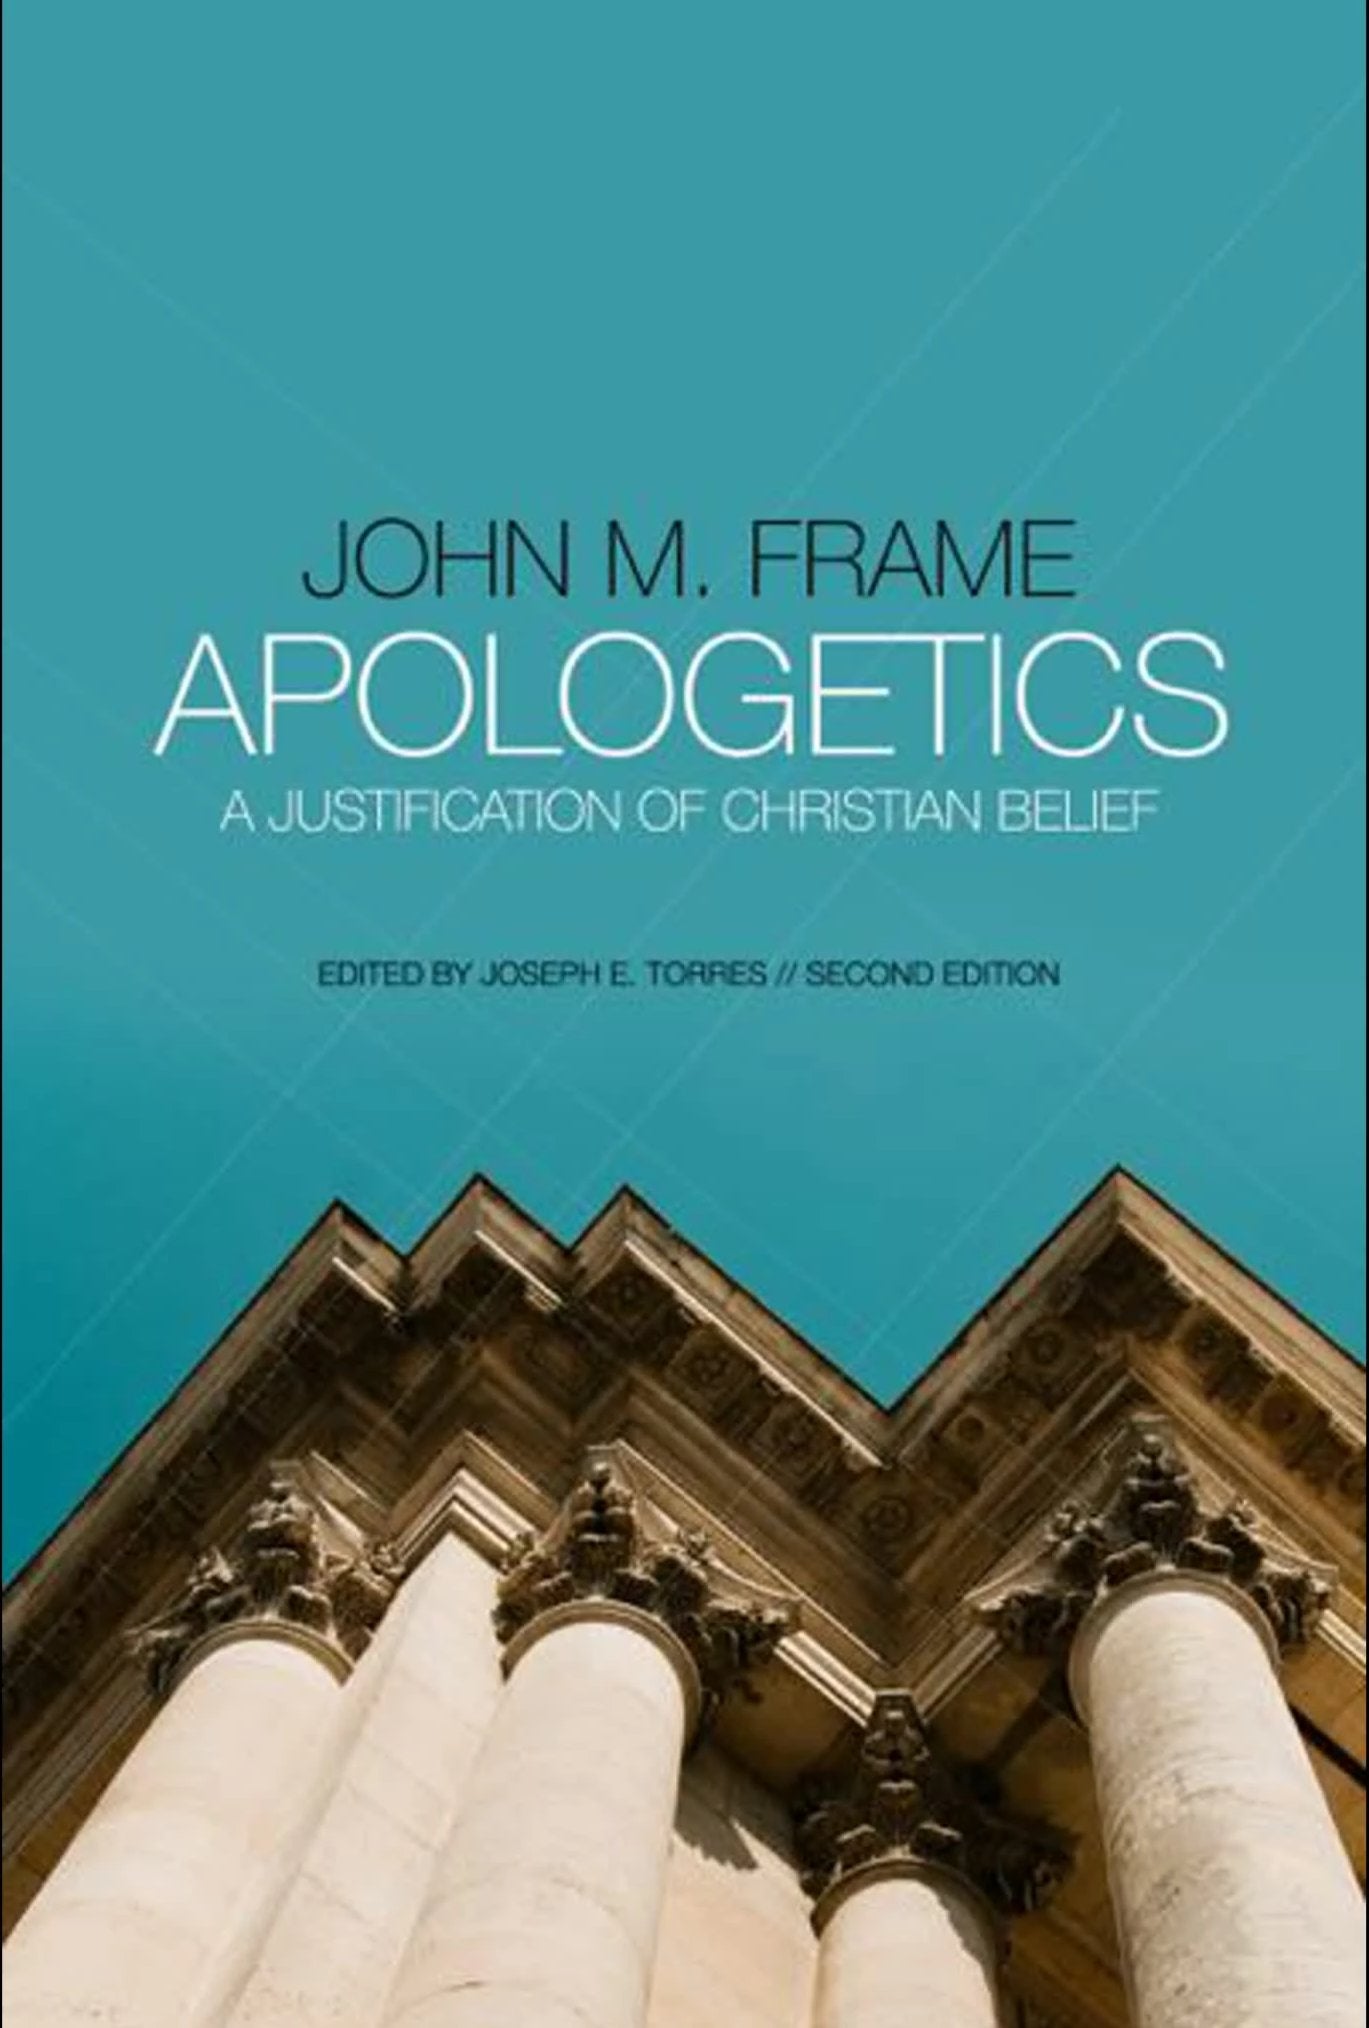 Apologetics: A Justification of Christian Belief: NEW!